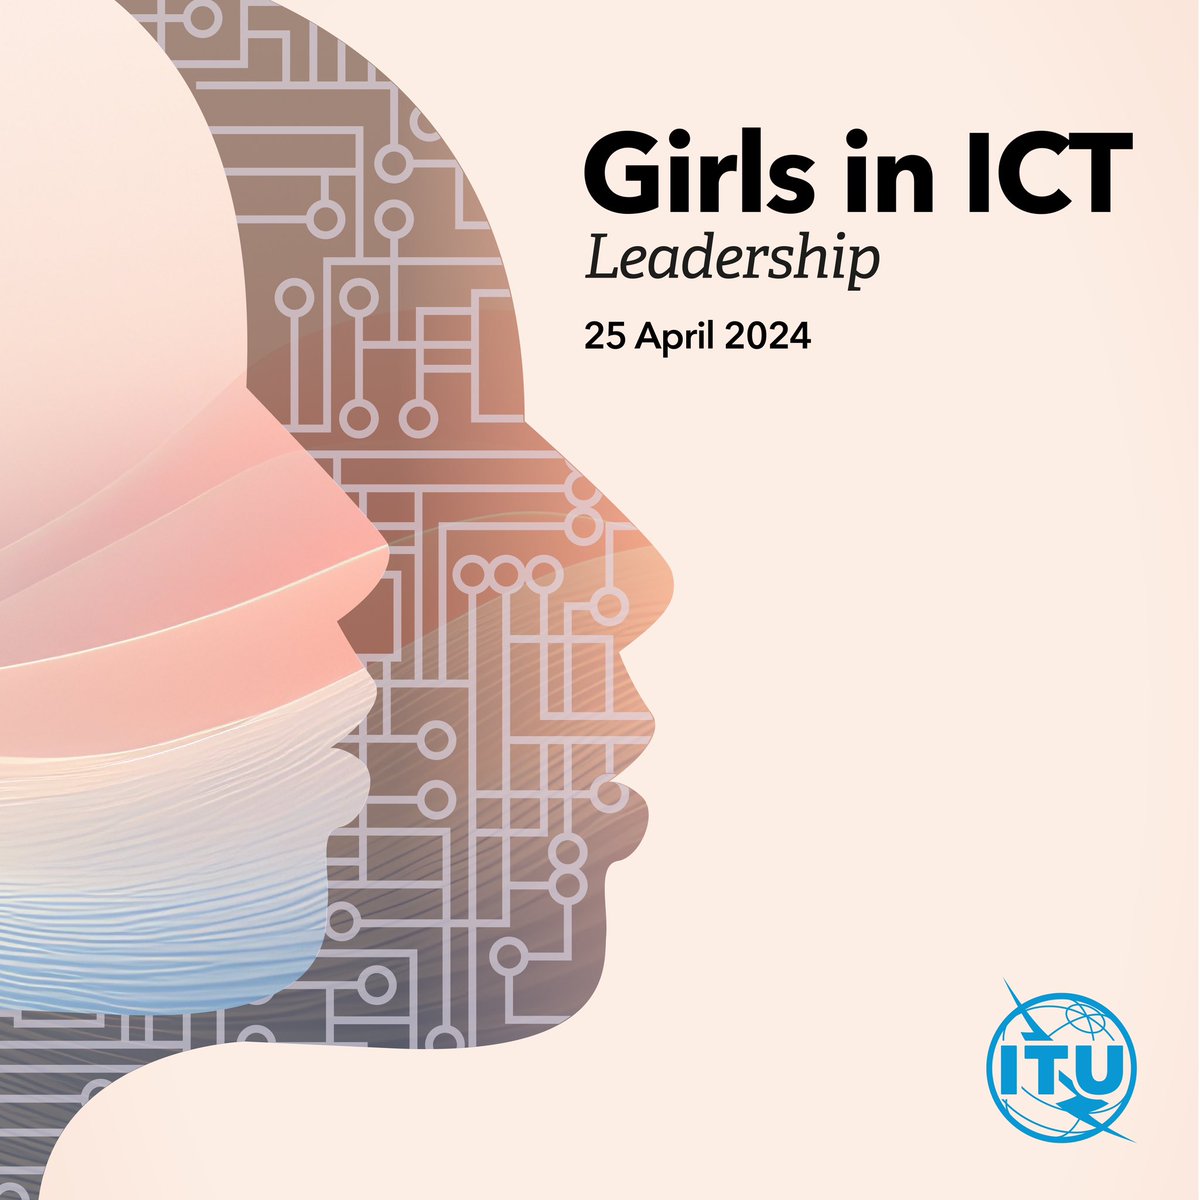 The countdown is on to one of my favorite days in the @ITU calendar... #GirlsInICT Day! Who's celebrating with me this year? 😀